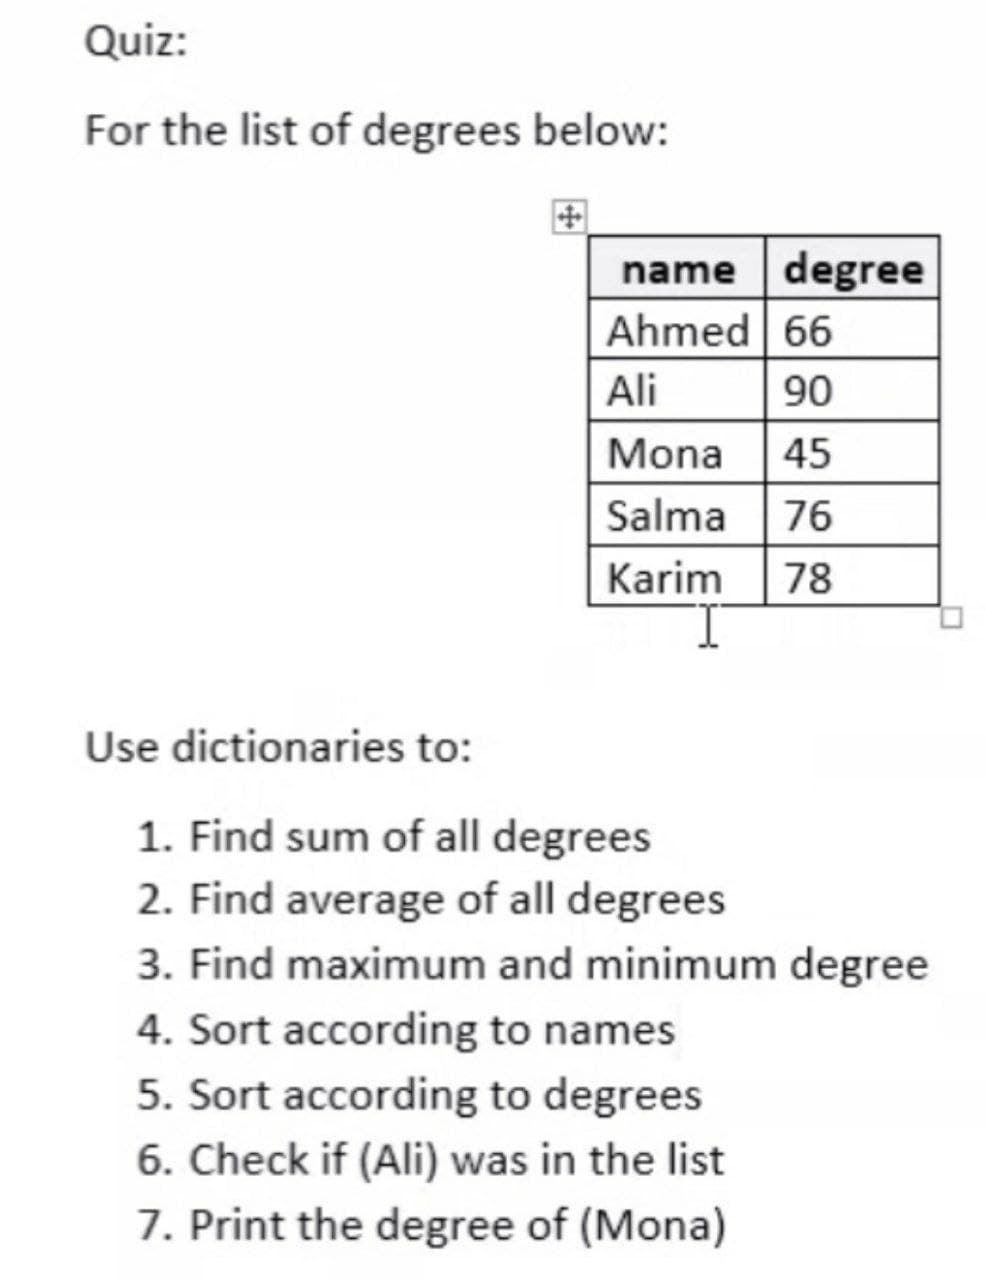 Quiz:
For the list of degrees below:
name degree
Ahmed 66
Ali
90
Mona
45
Salma
76
Karim
78
Use dictionaries to:
1. Find sum of all degrees
2. Find average of all degrees
3. Find maximum and minimum degree
4. Sort according to names
5. Sort according to degrees
6. Check if (Ali) was in the list
7. Print the degree of (Mona)
